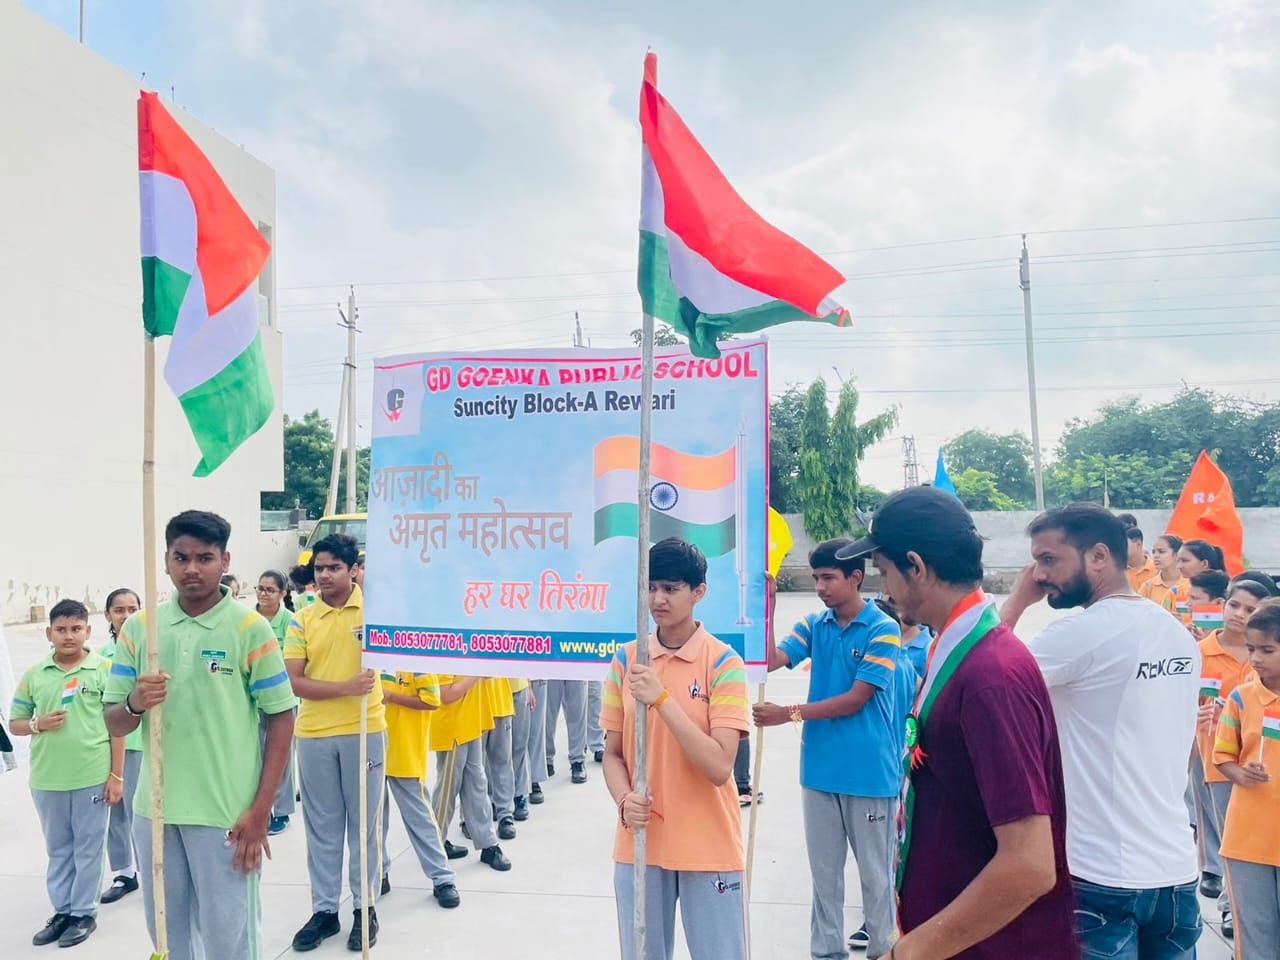 Tricolor yatra and various activities related to independence day